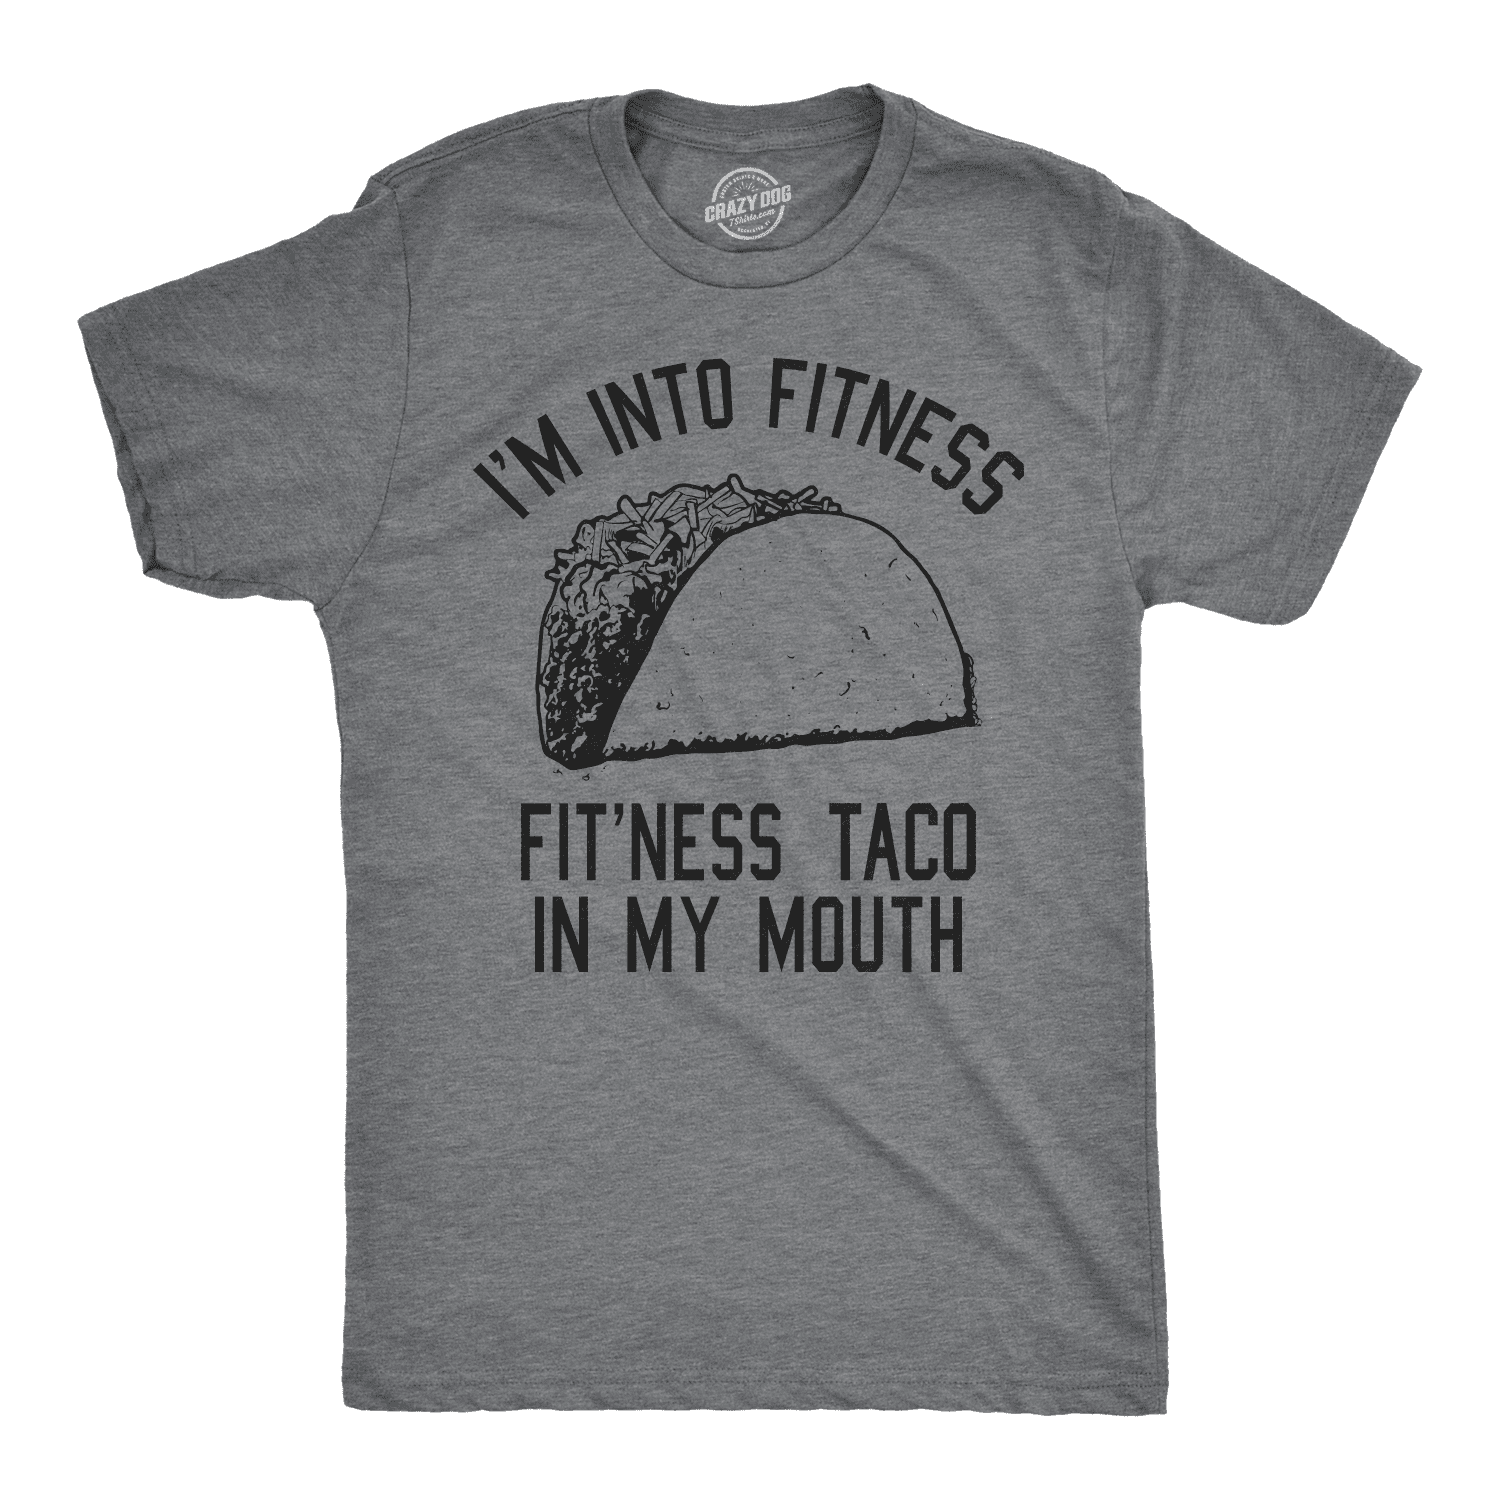 Mens Fitness Taco Funny T Shirt Humorous Gym Graphic Novelty Sarcastic Tee Guys